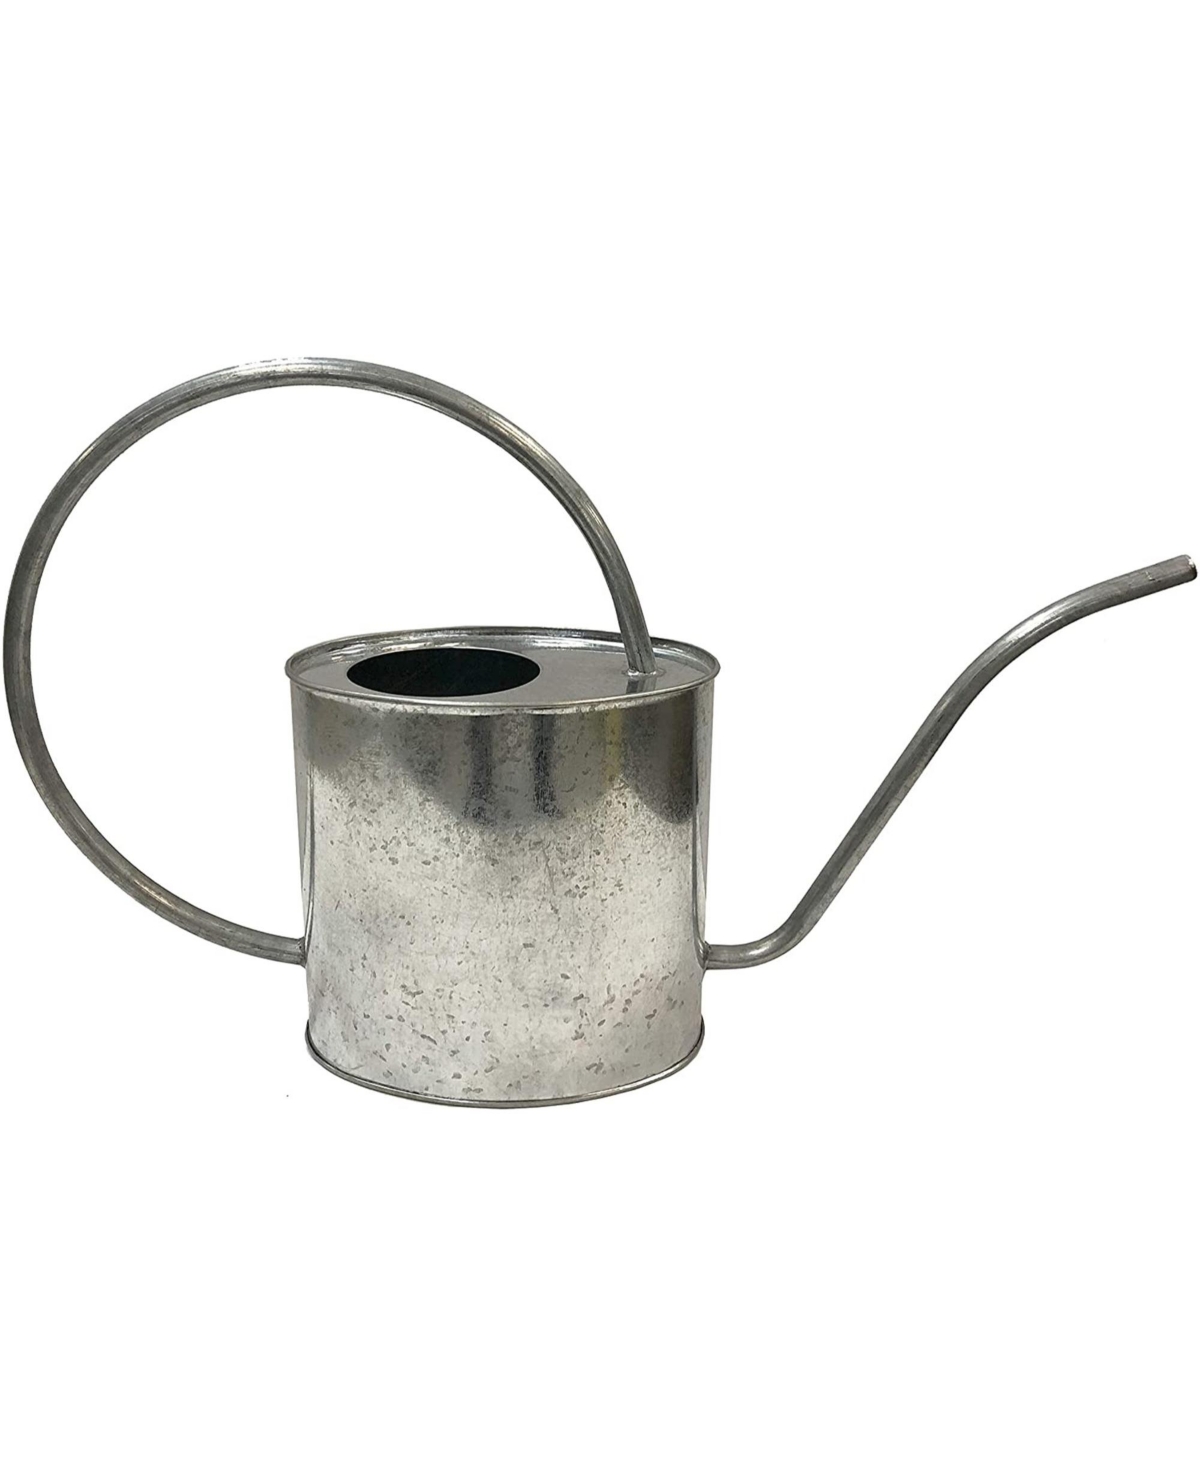 Gardener Select Metal Oval Watering Can, Galvanized, 0.5 Gallon - Silver